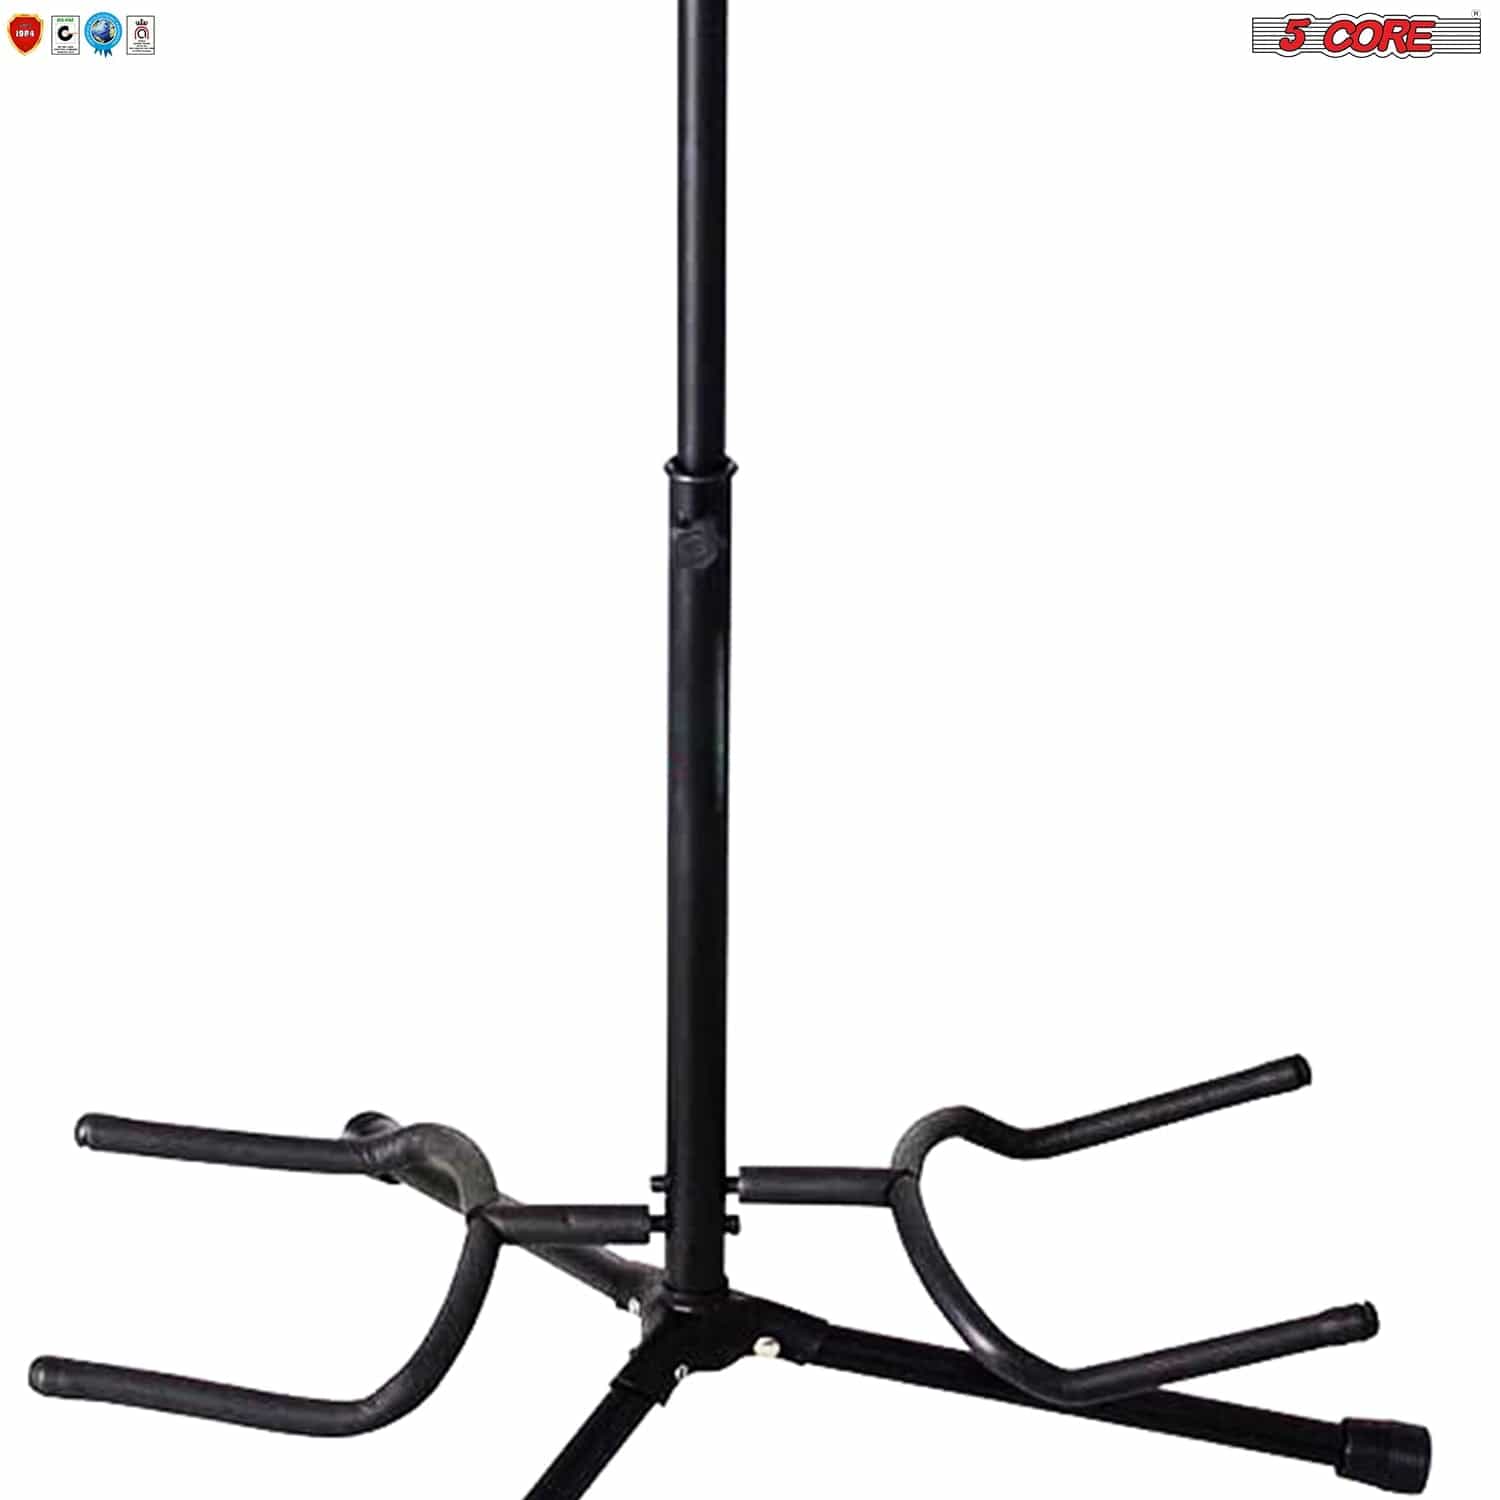 Guitar Stands 5Core Metal Guitar Stand for Acoustic Classic Electric Guitar Detachable Musical Instrument Stand (2 Guitar Holders) Breakthrough-Guitar-Gifts